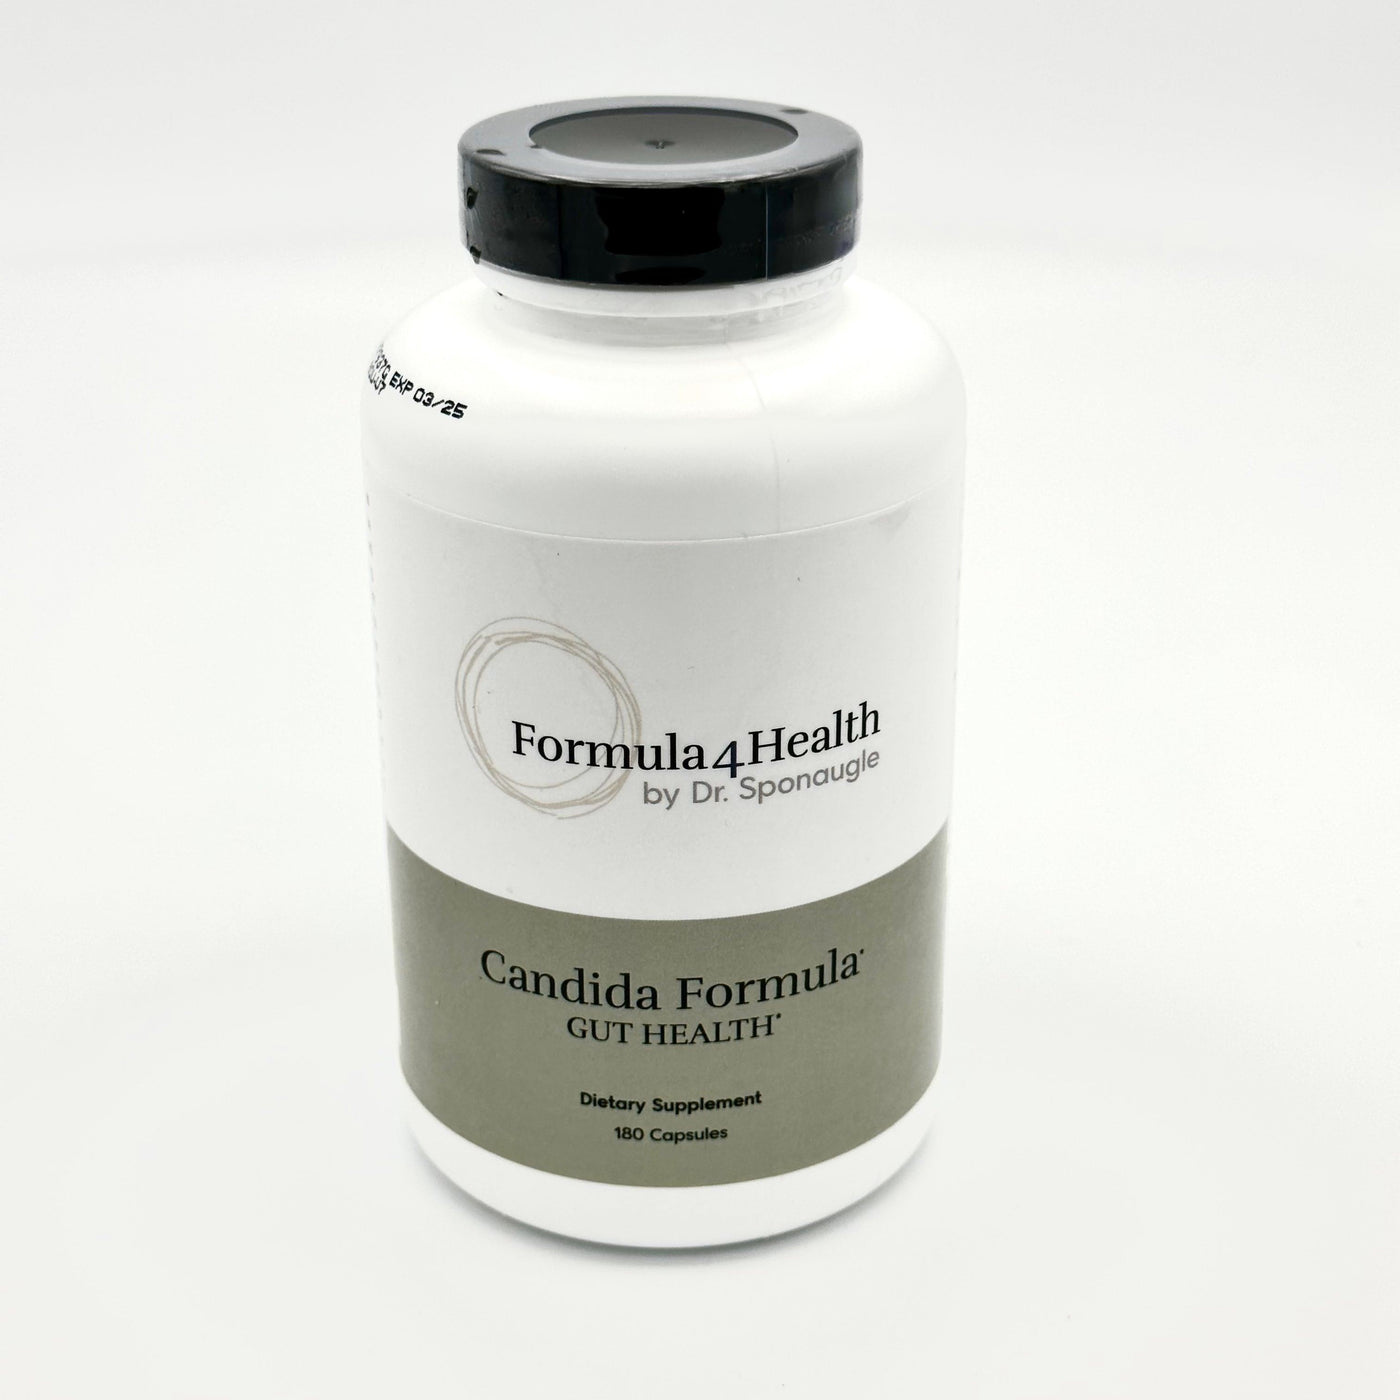 Candida Formula by  Formula 4 Health. Available for online purchase at  Formula For Health.